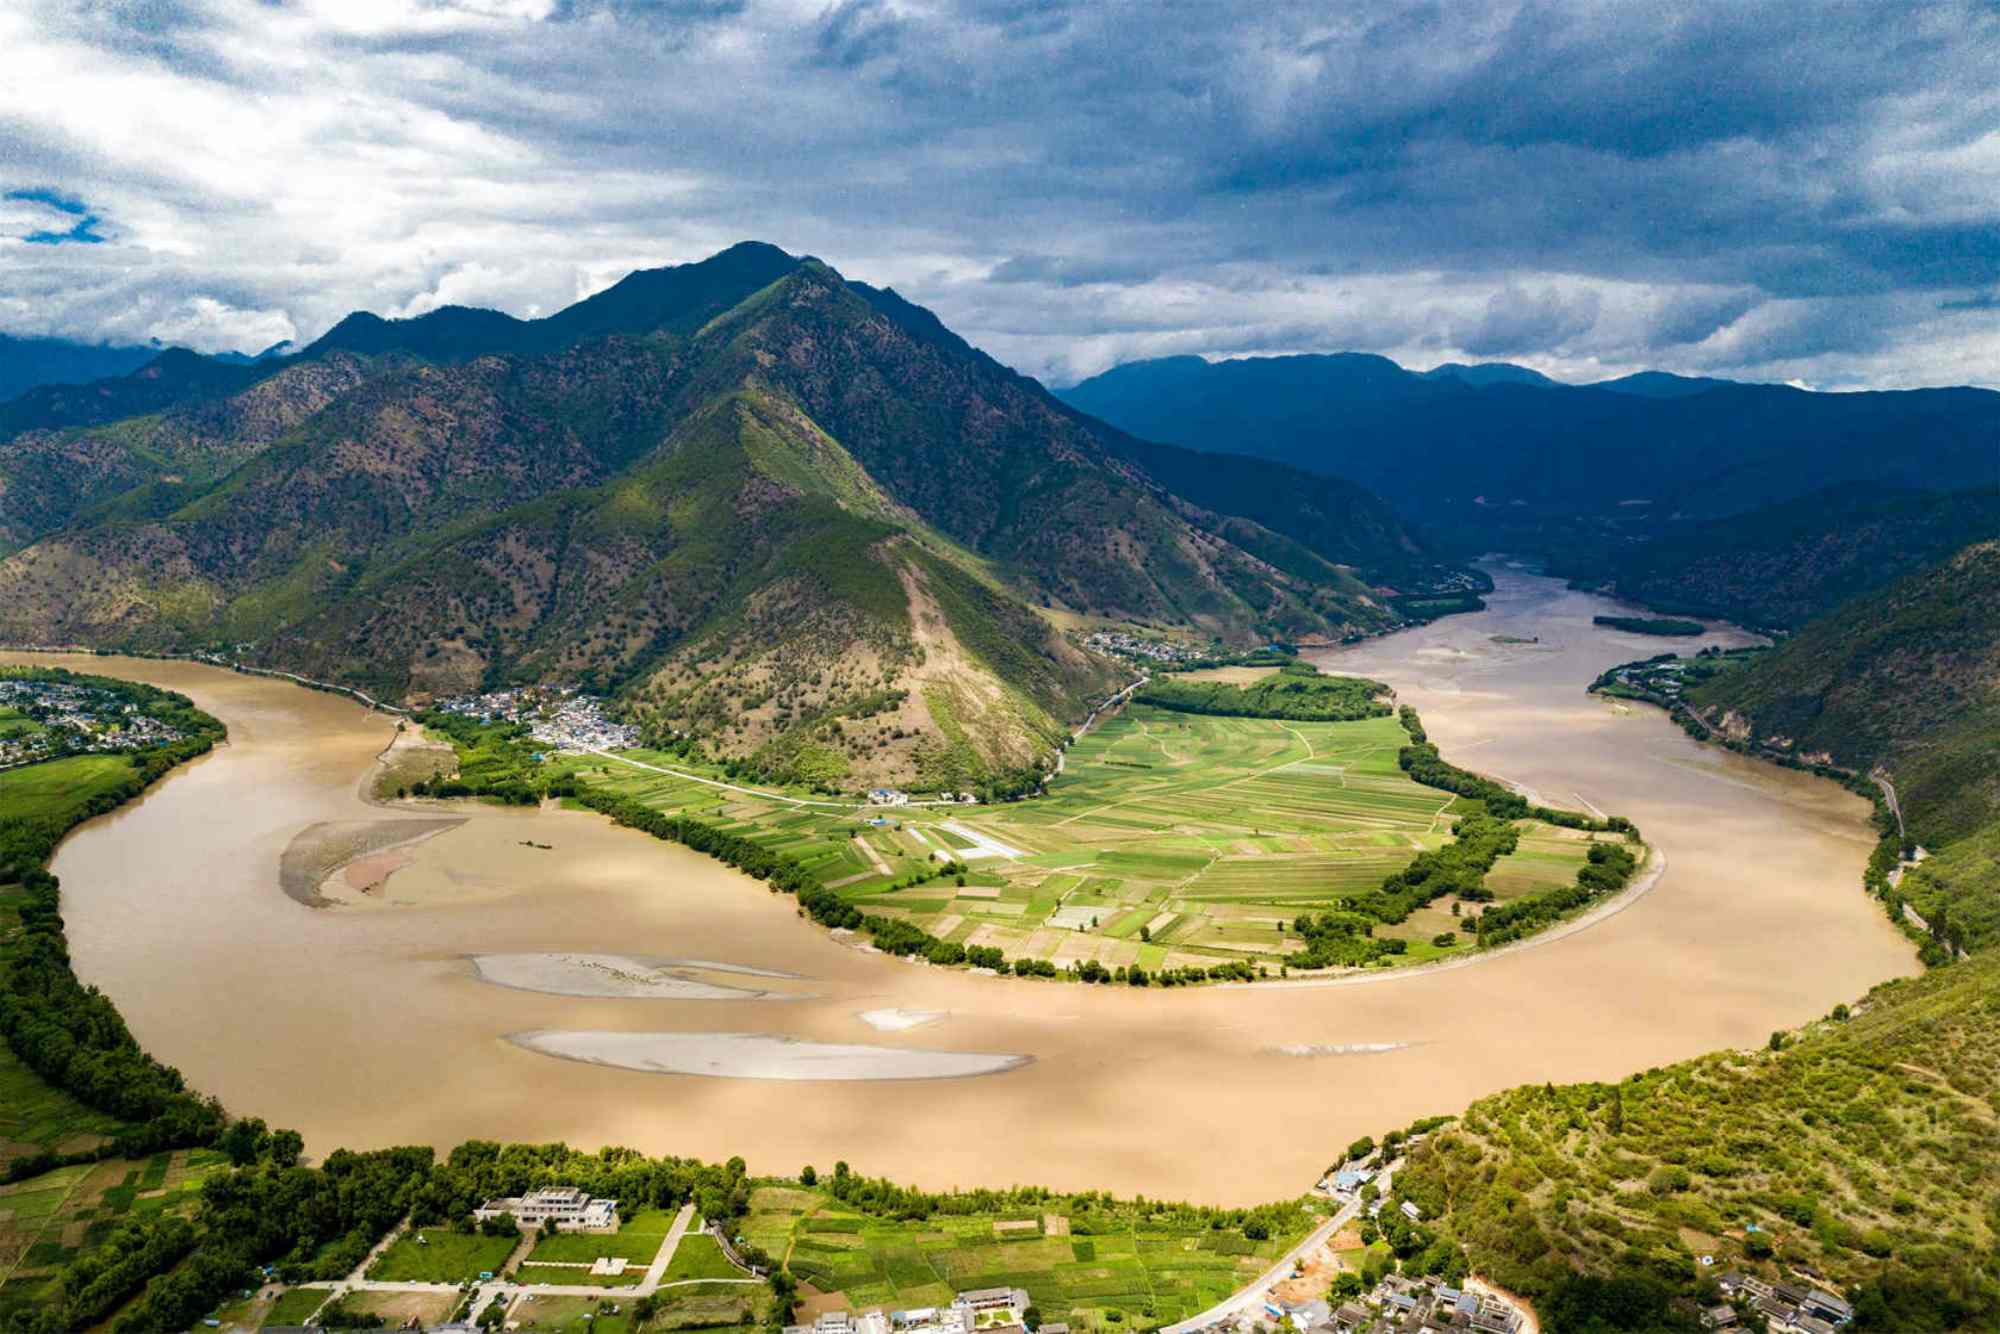 The first bend of the Yangtze River Tour